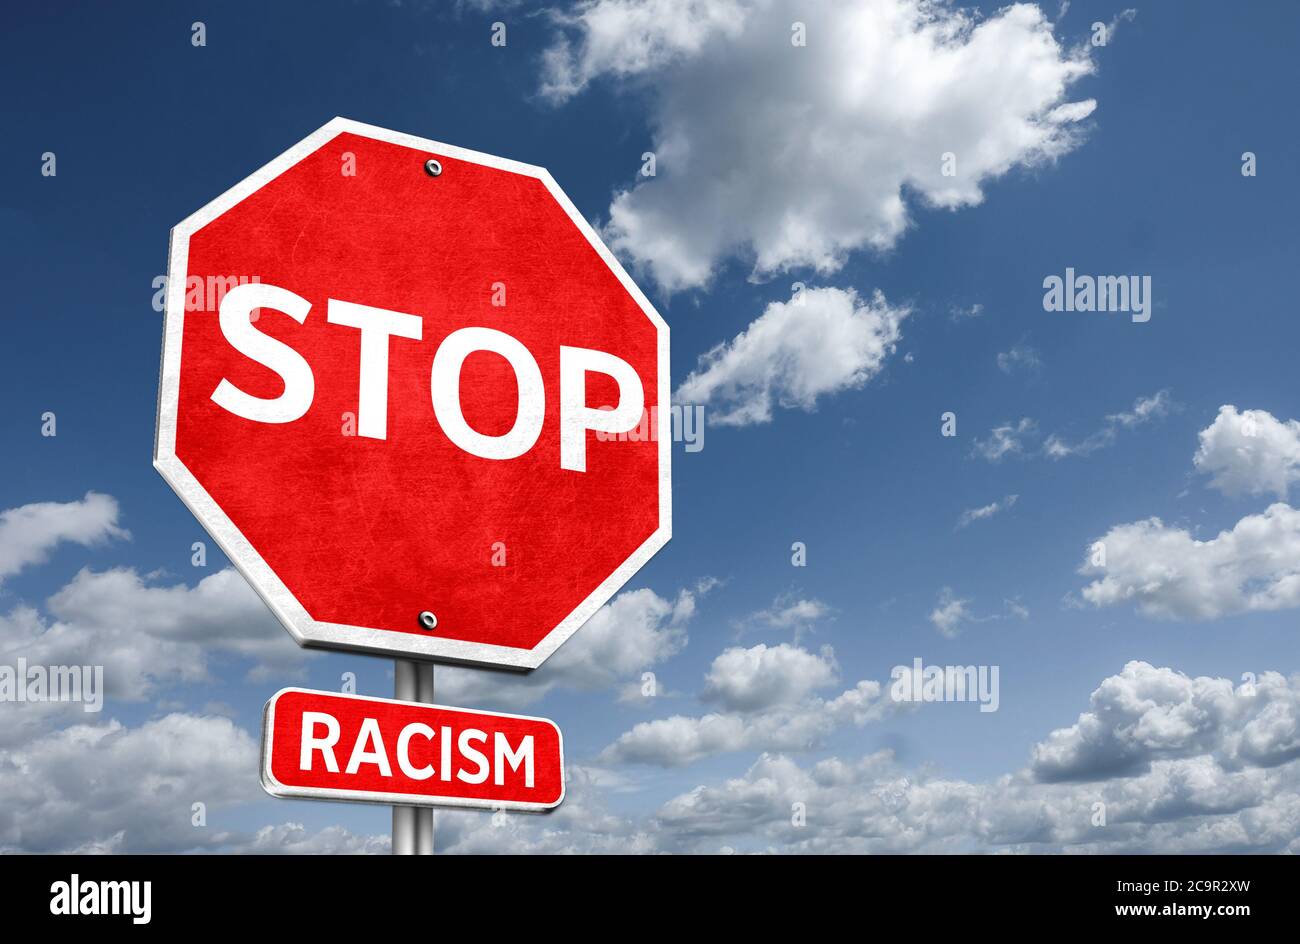 STOP RACISM - roadsign illustration message Stock Photo